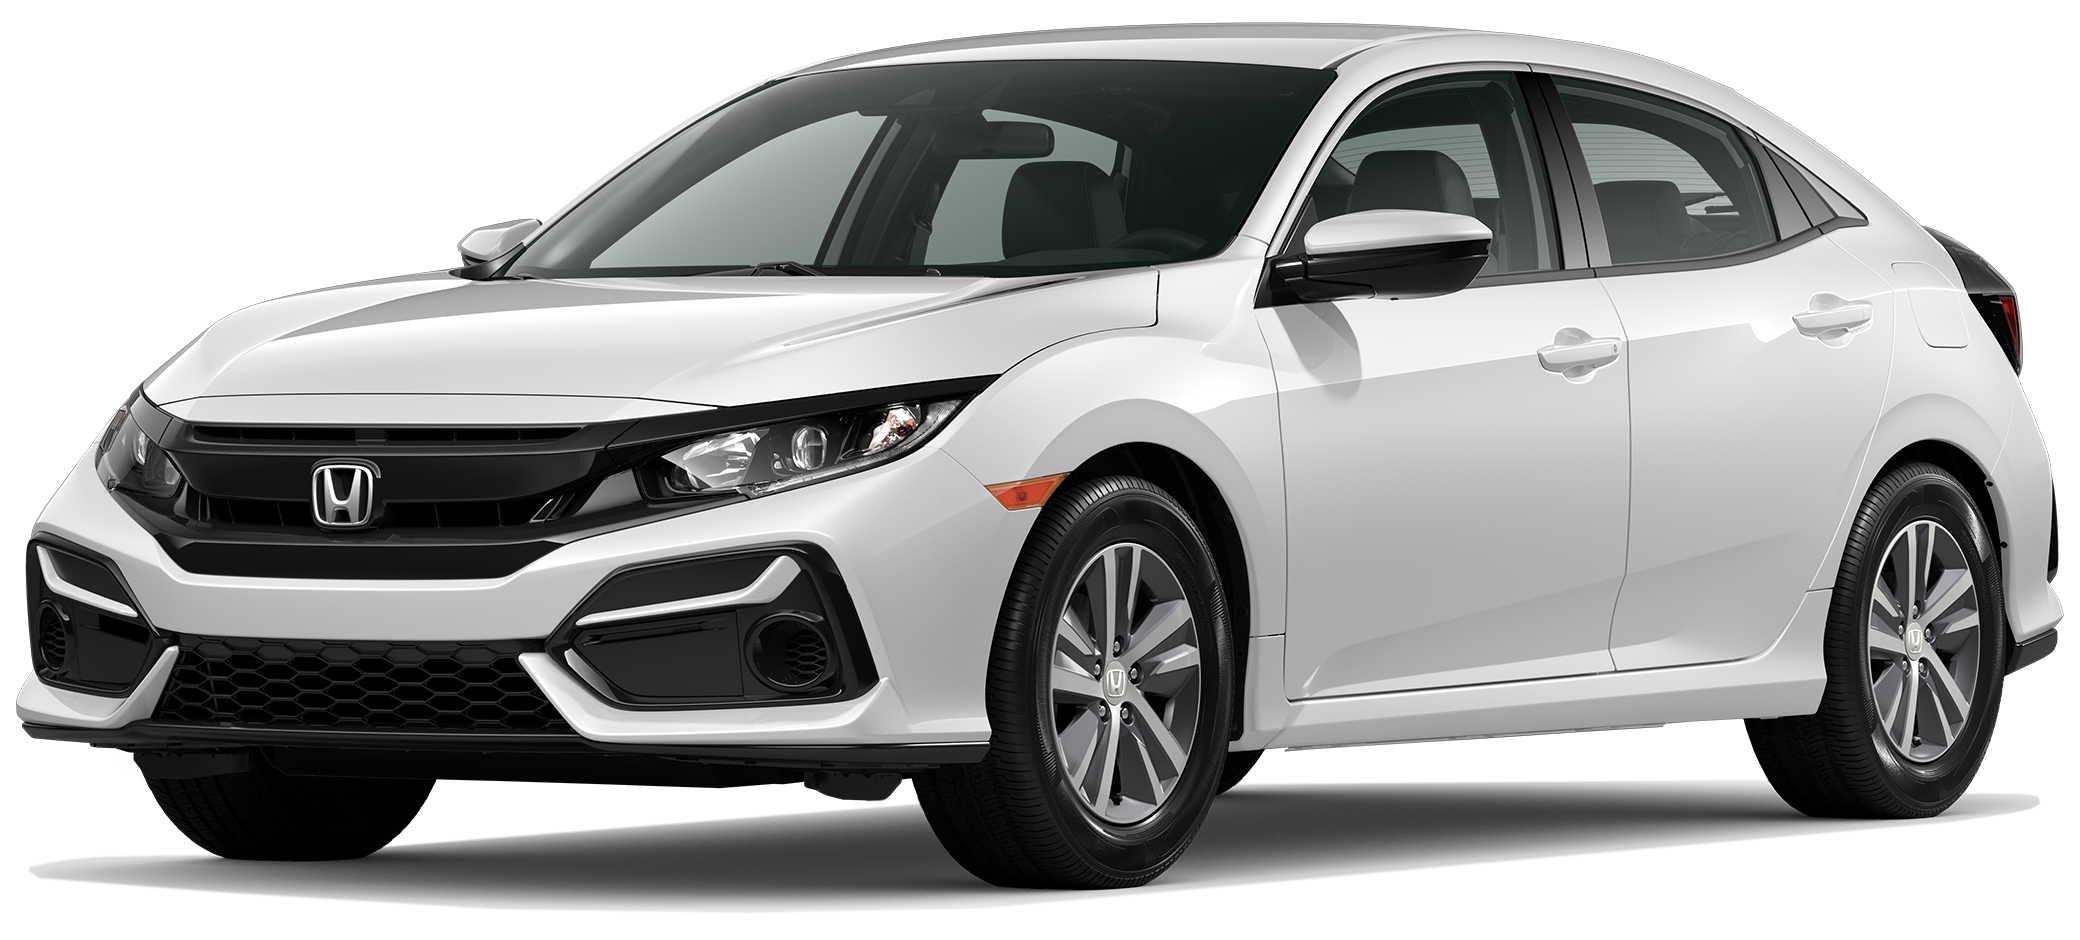 2020 Honda Civic Incentives Specials Offers In Branford CT